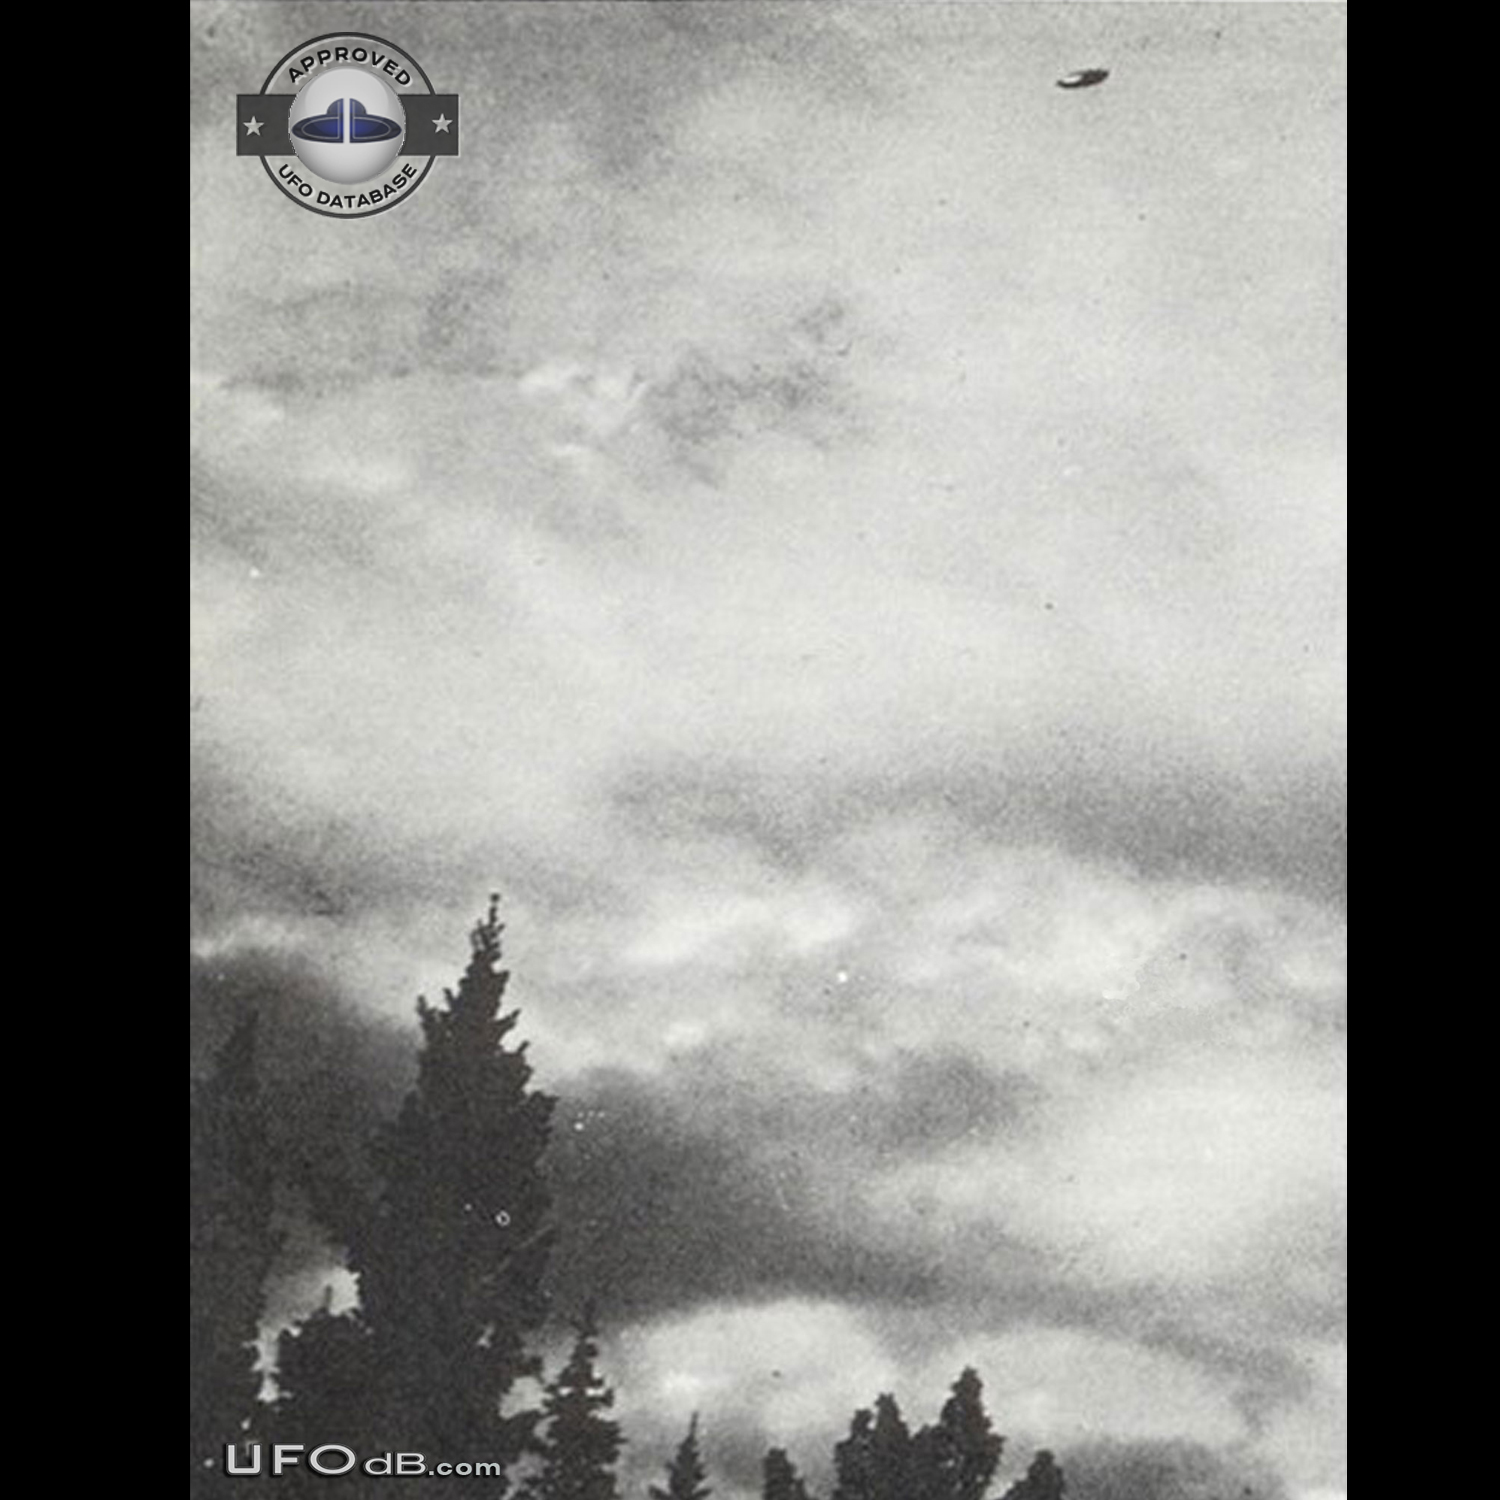 1967 Calgary UFO picture considered to be in the top 10 of all times UFO Picture #448-1